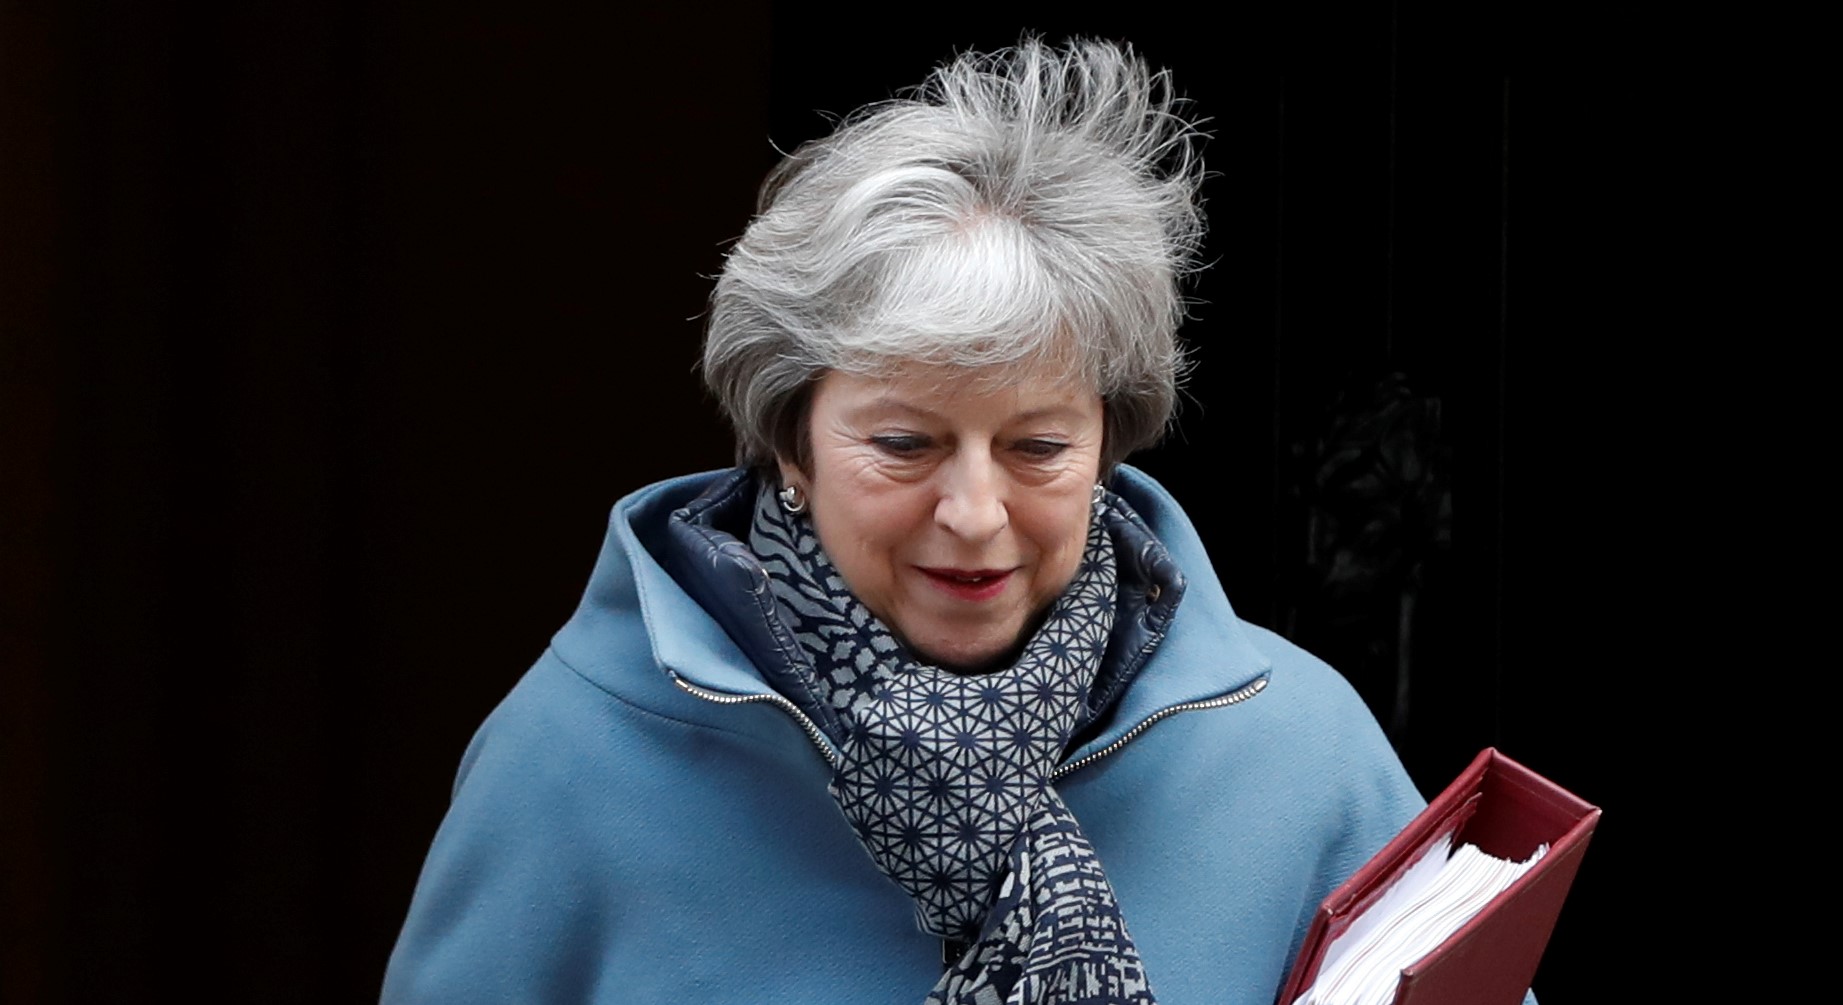 May meets disgruntled anti-Brexiteers to curb split in conservative